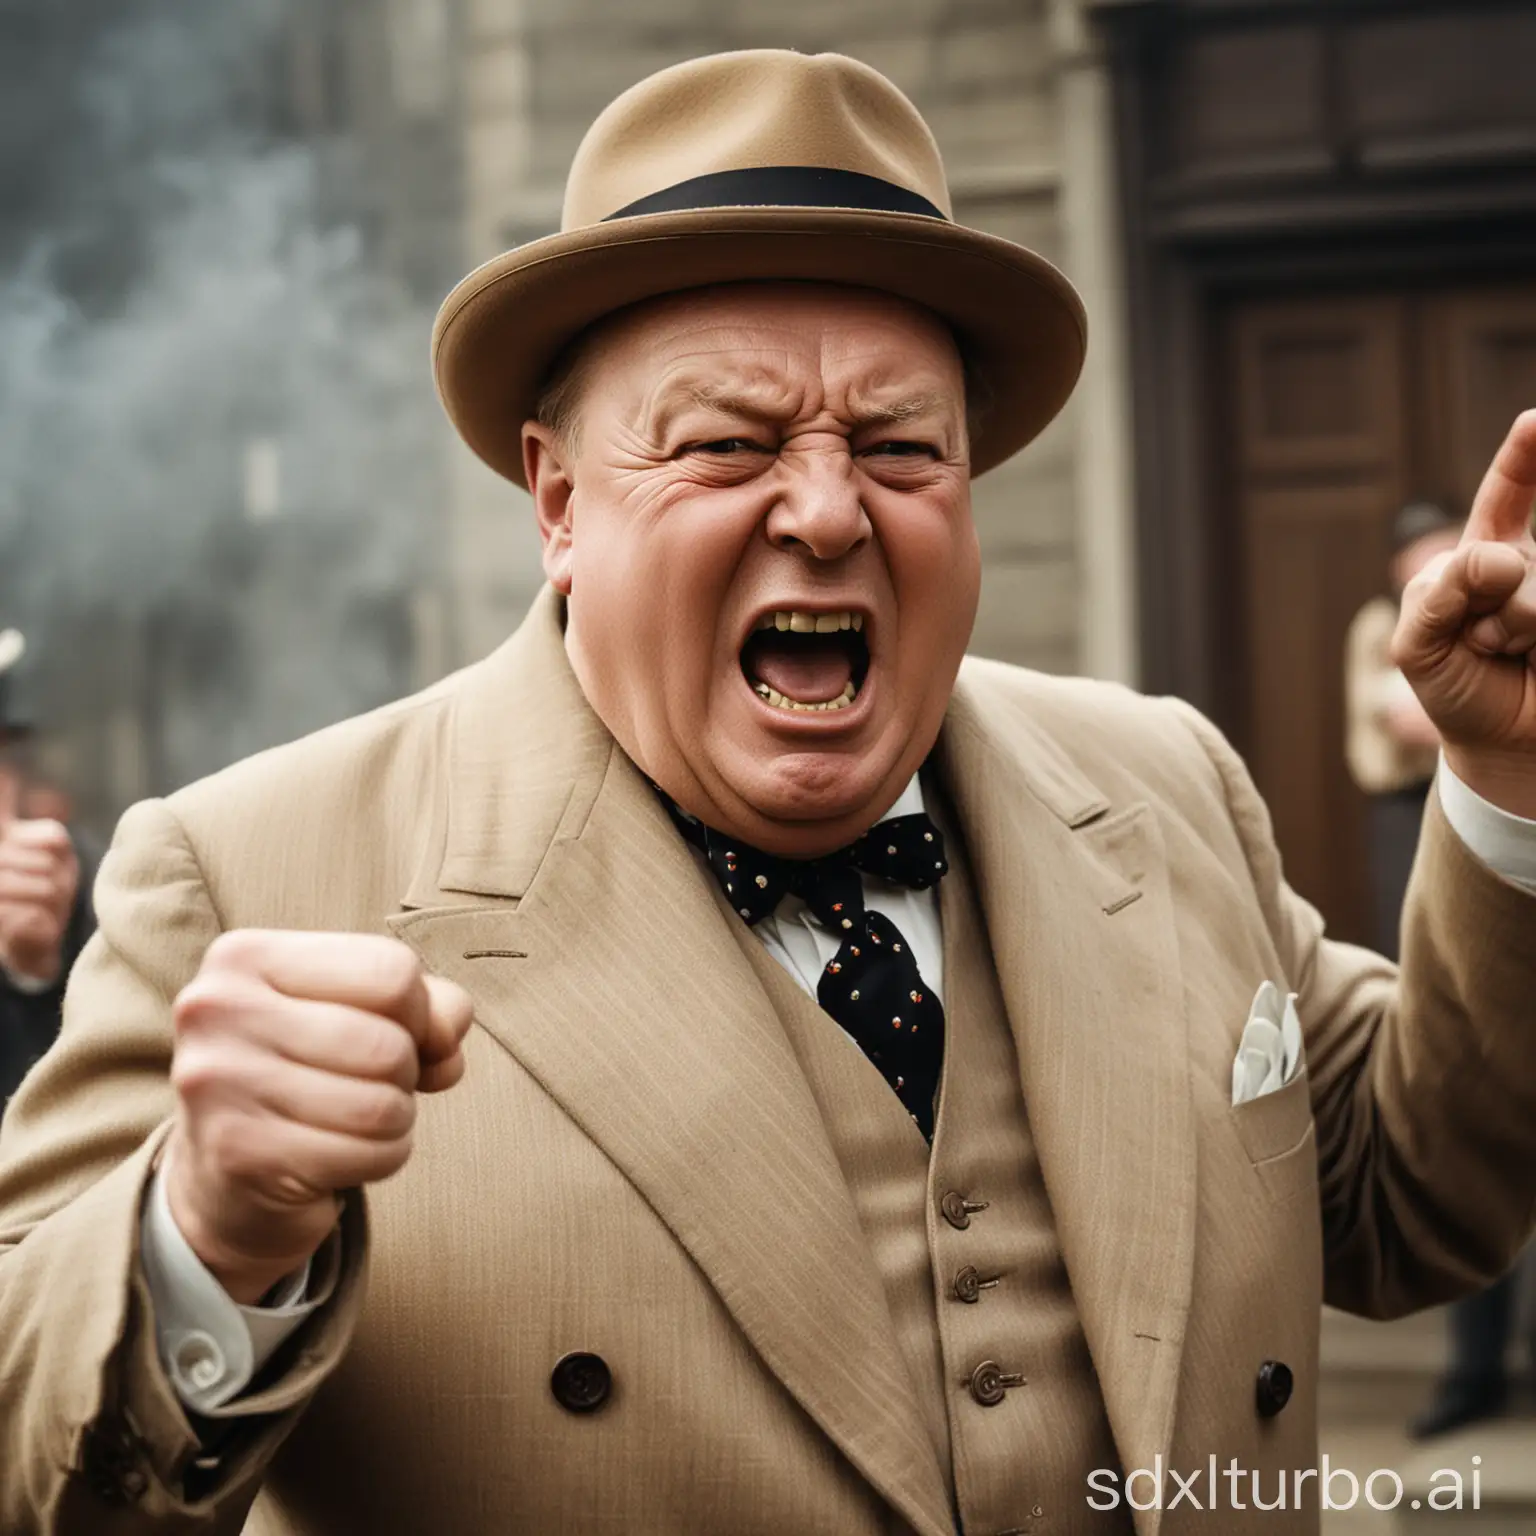 Old color photo of angry Winston Churchill screaming and shaking his fist